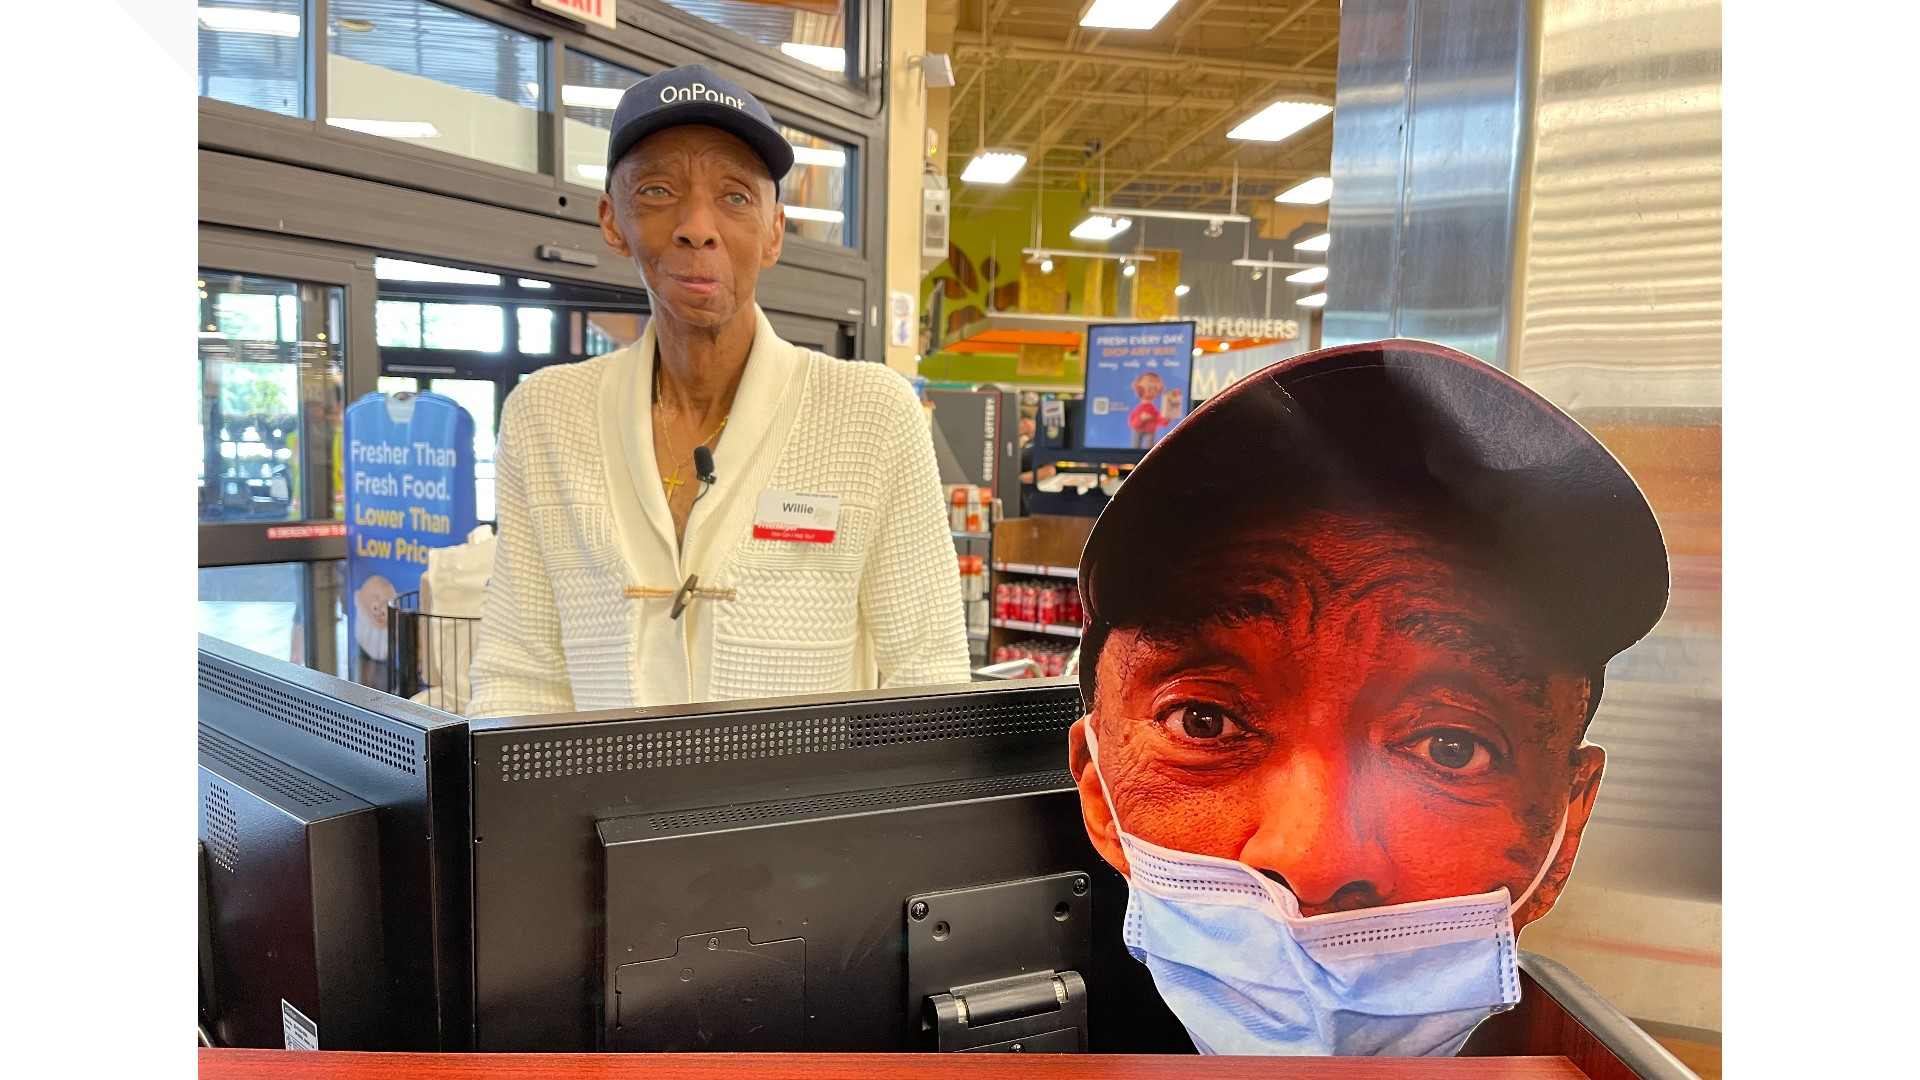 Willie Binns greets shoppers at the Hollywood Fred Meyer. He started working there in 2020 while undergoing chemo and radiation therapy. He is currently cancer-free